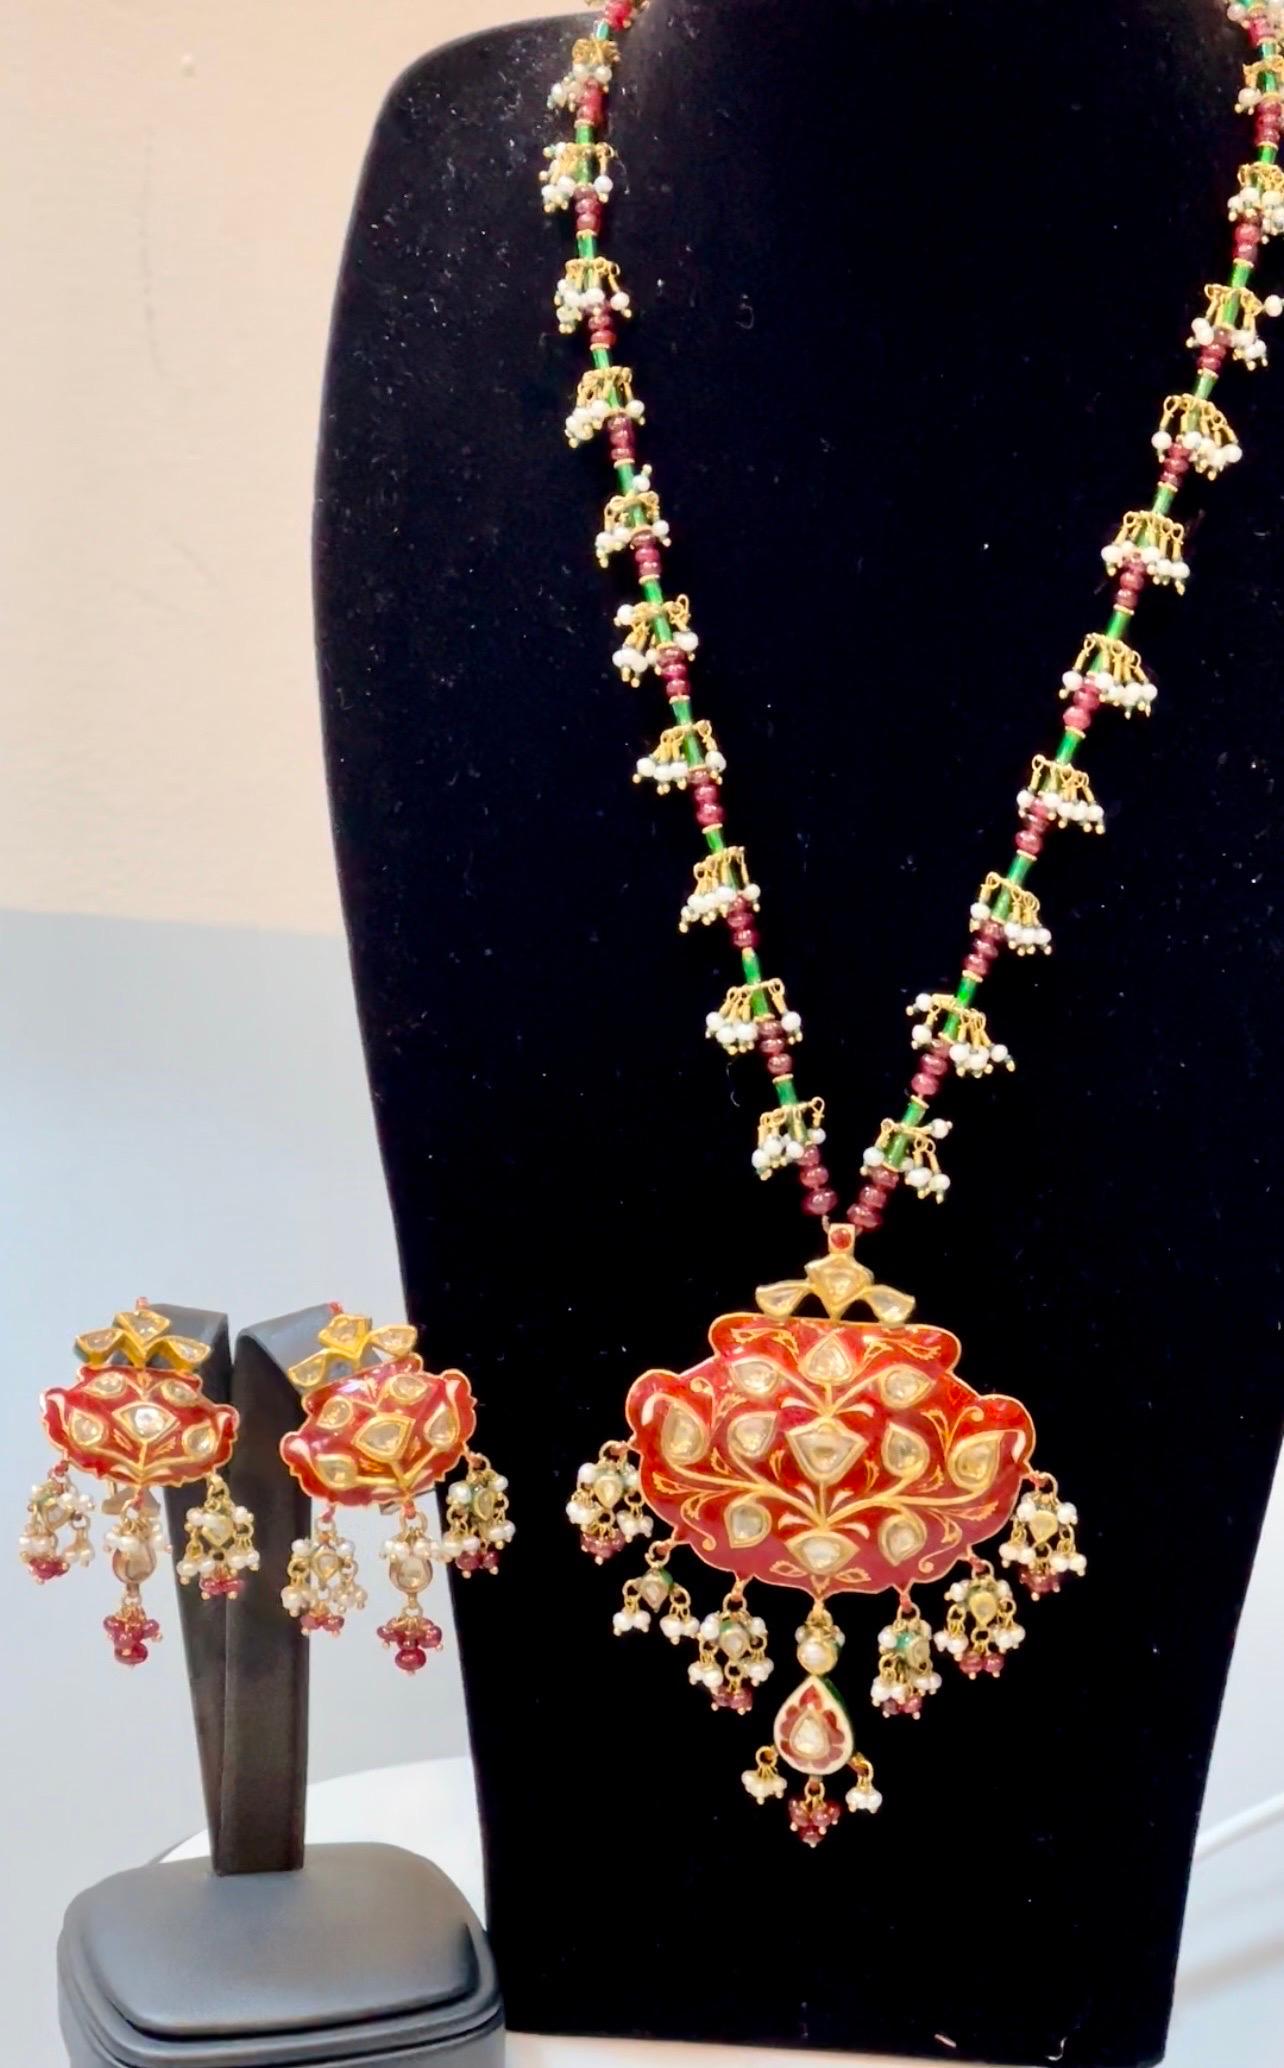 Mughal Magnificenct Traditional Kundan Polki Rose Cut Diamond Red Enamel Suite
Maharajas & Mughal Magnificenct  Necklace and Heavy Antique Gold Matching  Earrings
Jadau Traditional Kundan real Polki Rose Cut Diamond 18 Karat  Yellow  Gold  Bridal